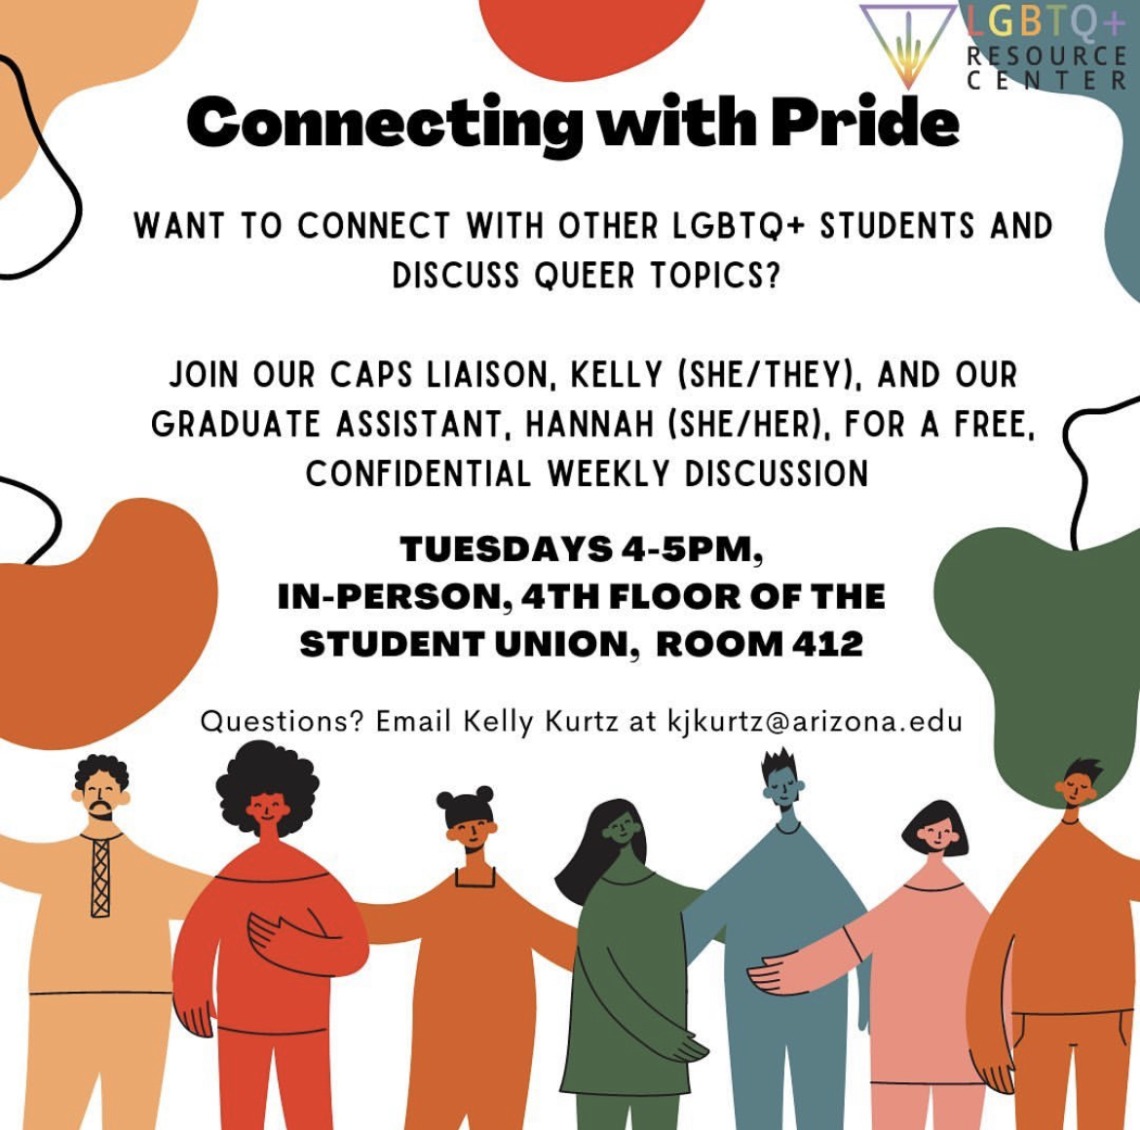 White flyer with image of people with their arms around each other. Text reads: Connecting with pride, Tuesdays 4-5pm, In-person, 4th floor student union, room 412. questions? email kelly kurtz at kjkurtz@arizona.edu